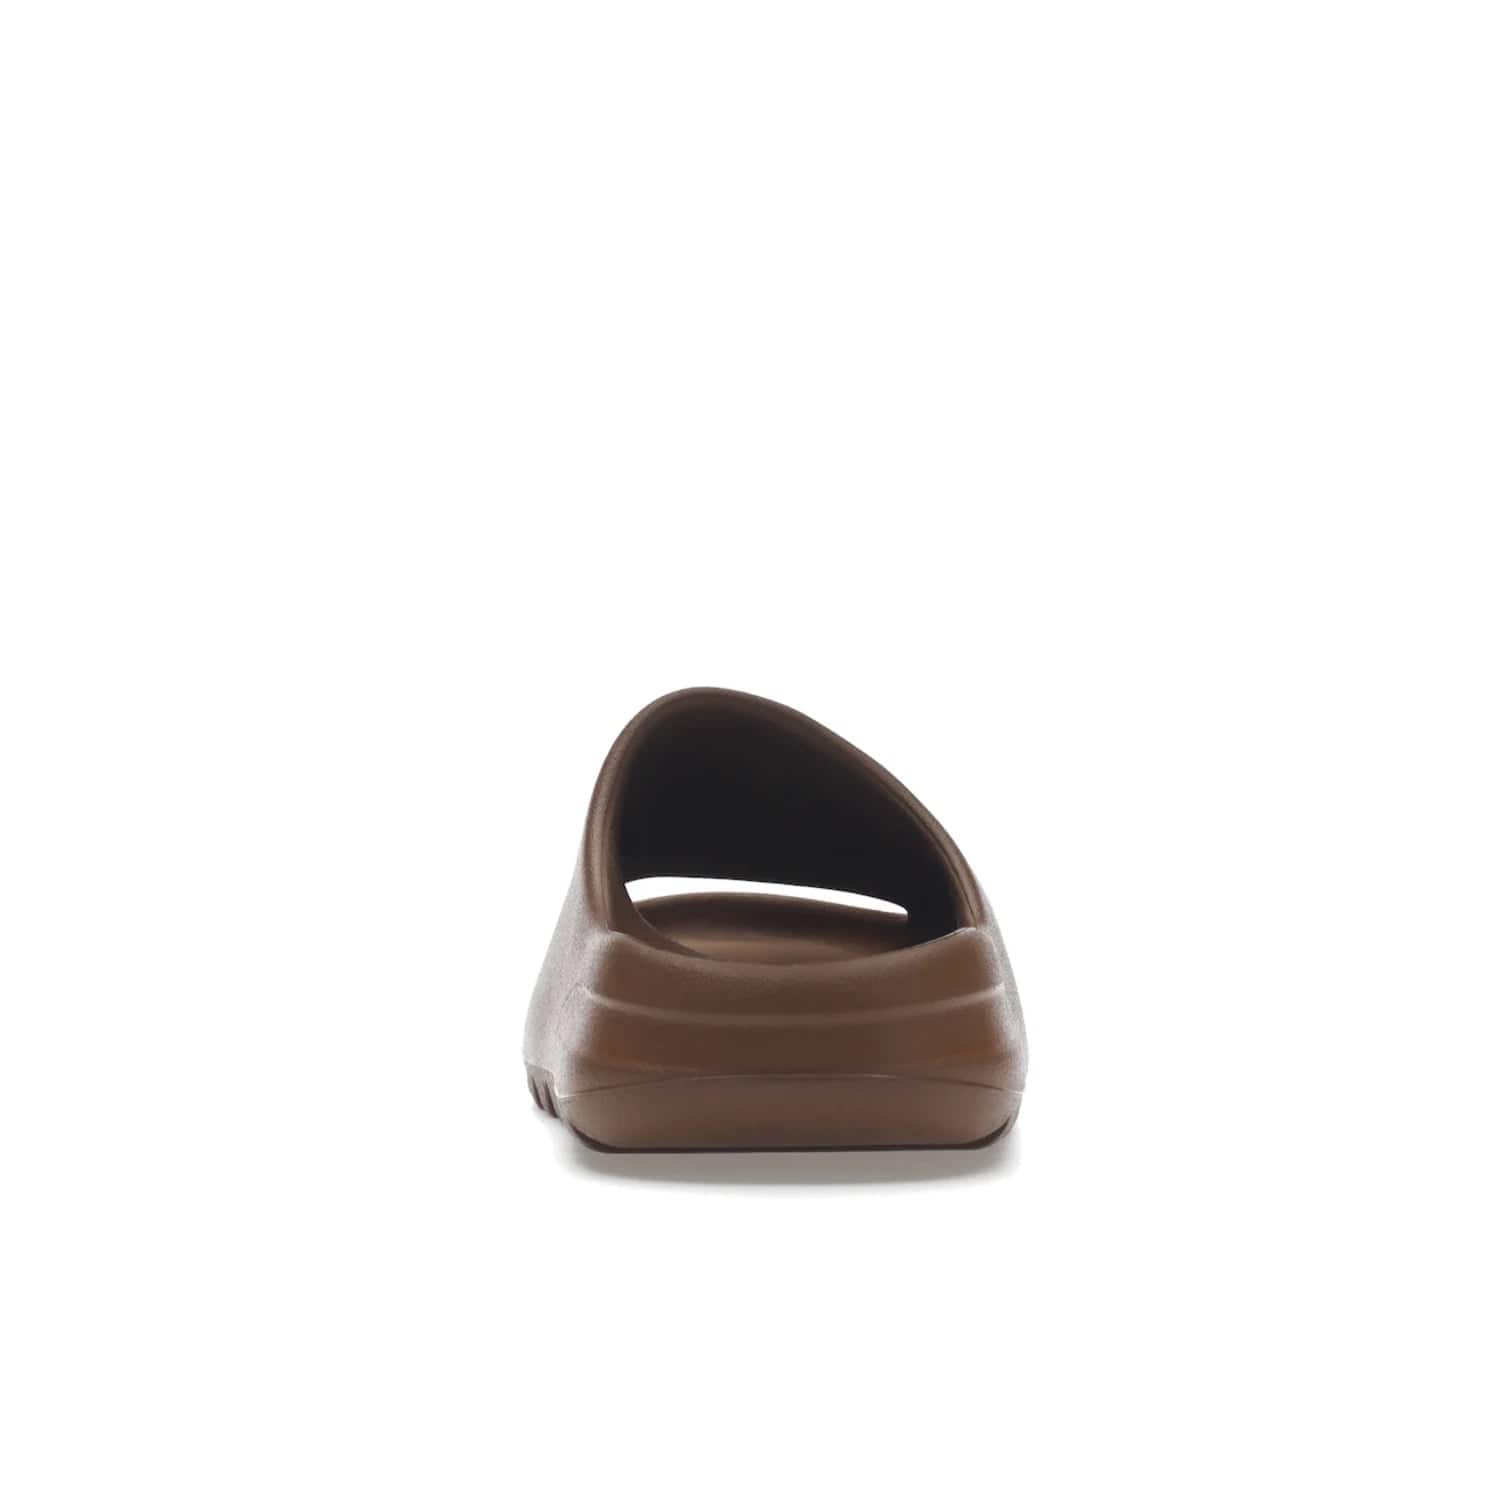 adidas Yeezy Slide Flax - Image 28 - Only at www.BallersClubKickz.com - Score the perfect casual look with the adidas Yeezy Slide Flax. Made with lightweight injected EVA plus horizontal grooves underfoot for traction. Release on August 22, 2022. $70.